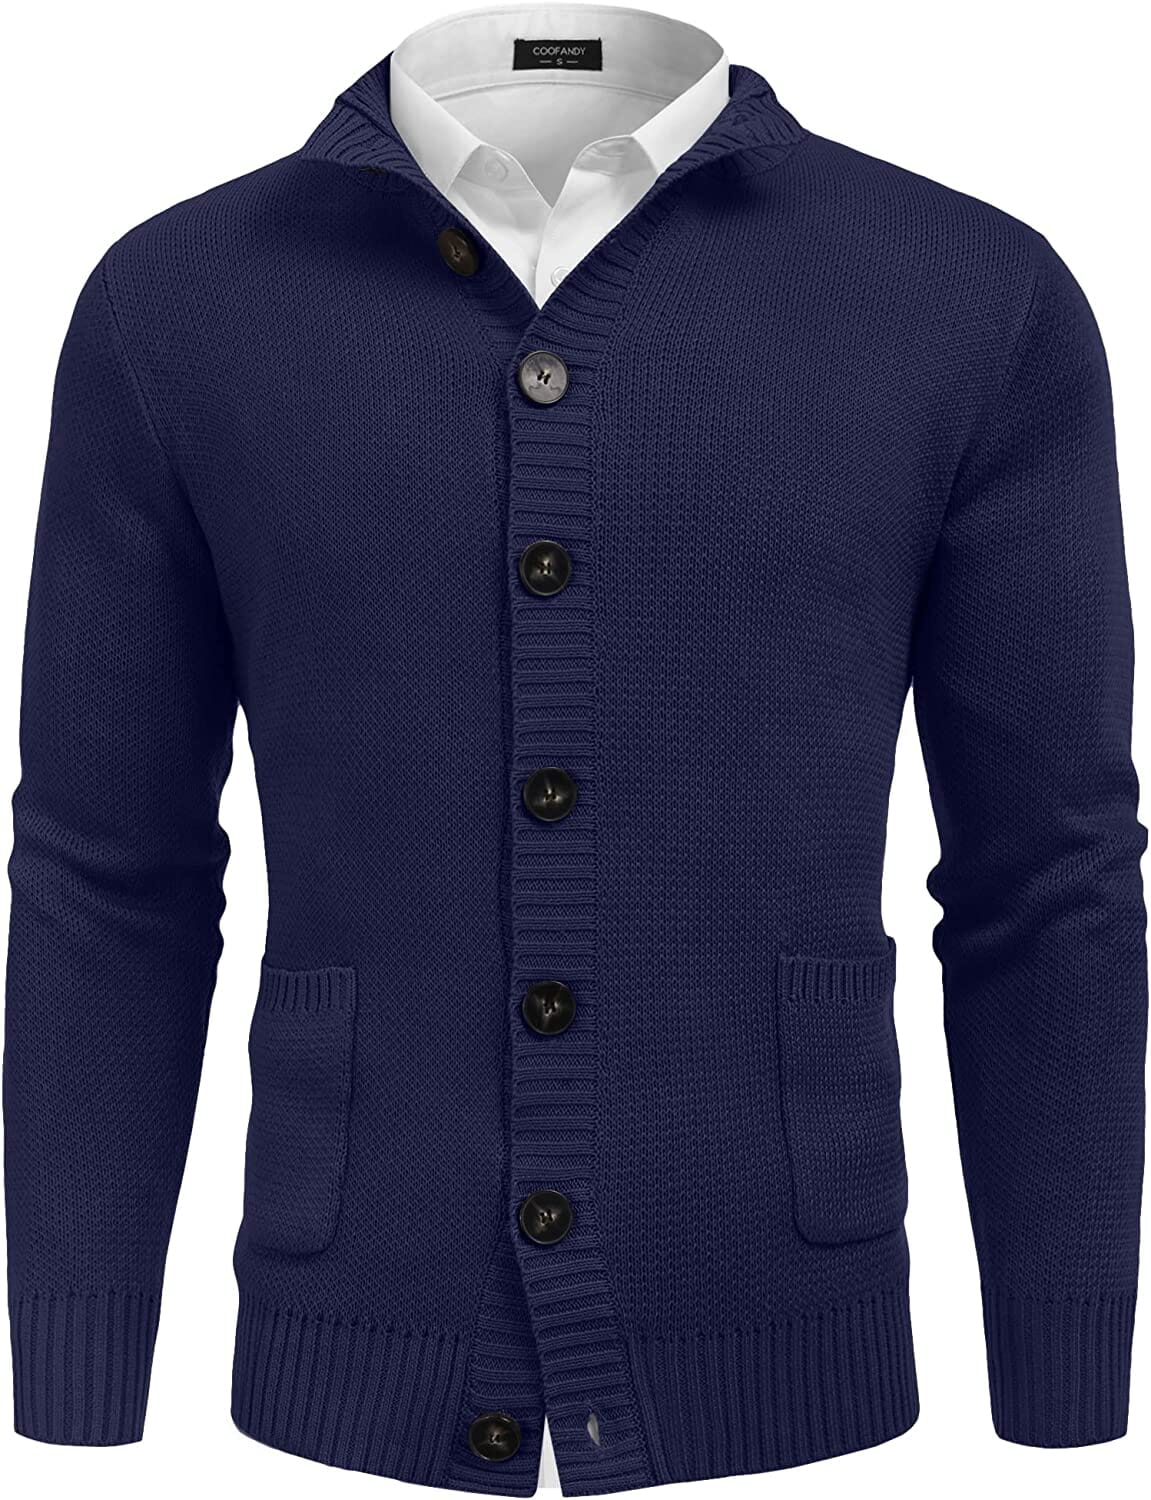 Stand Collar Button Down Knitted Cardigan with Pockets (US Only) Cardigans COOFANDY Store Navy Blue S 